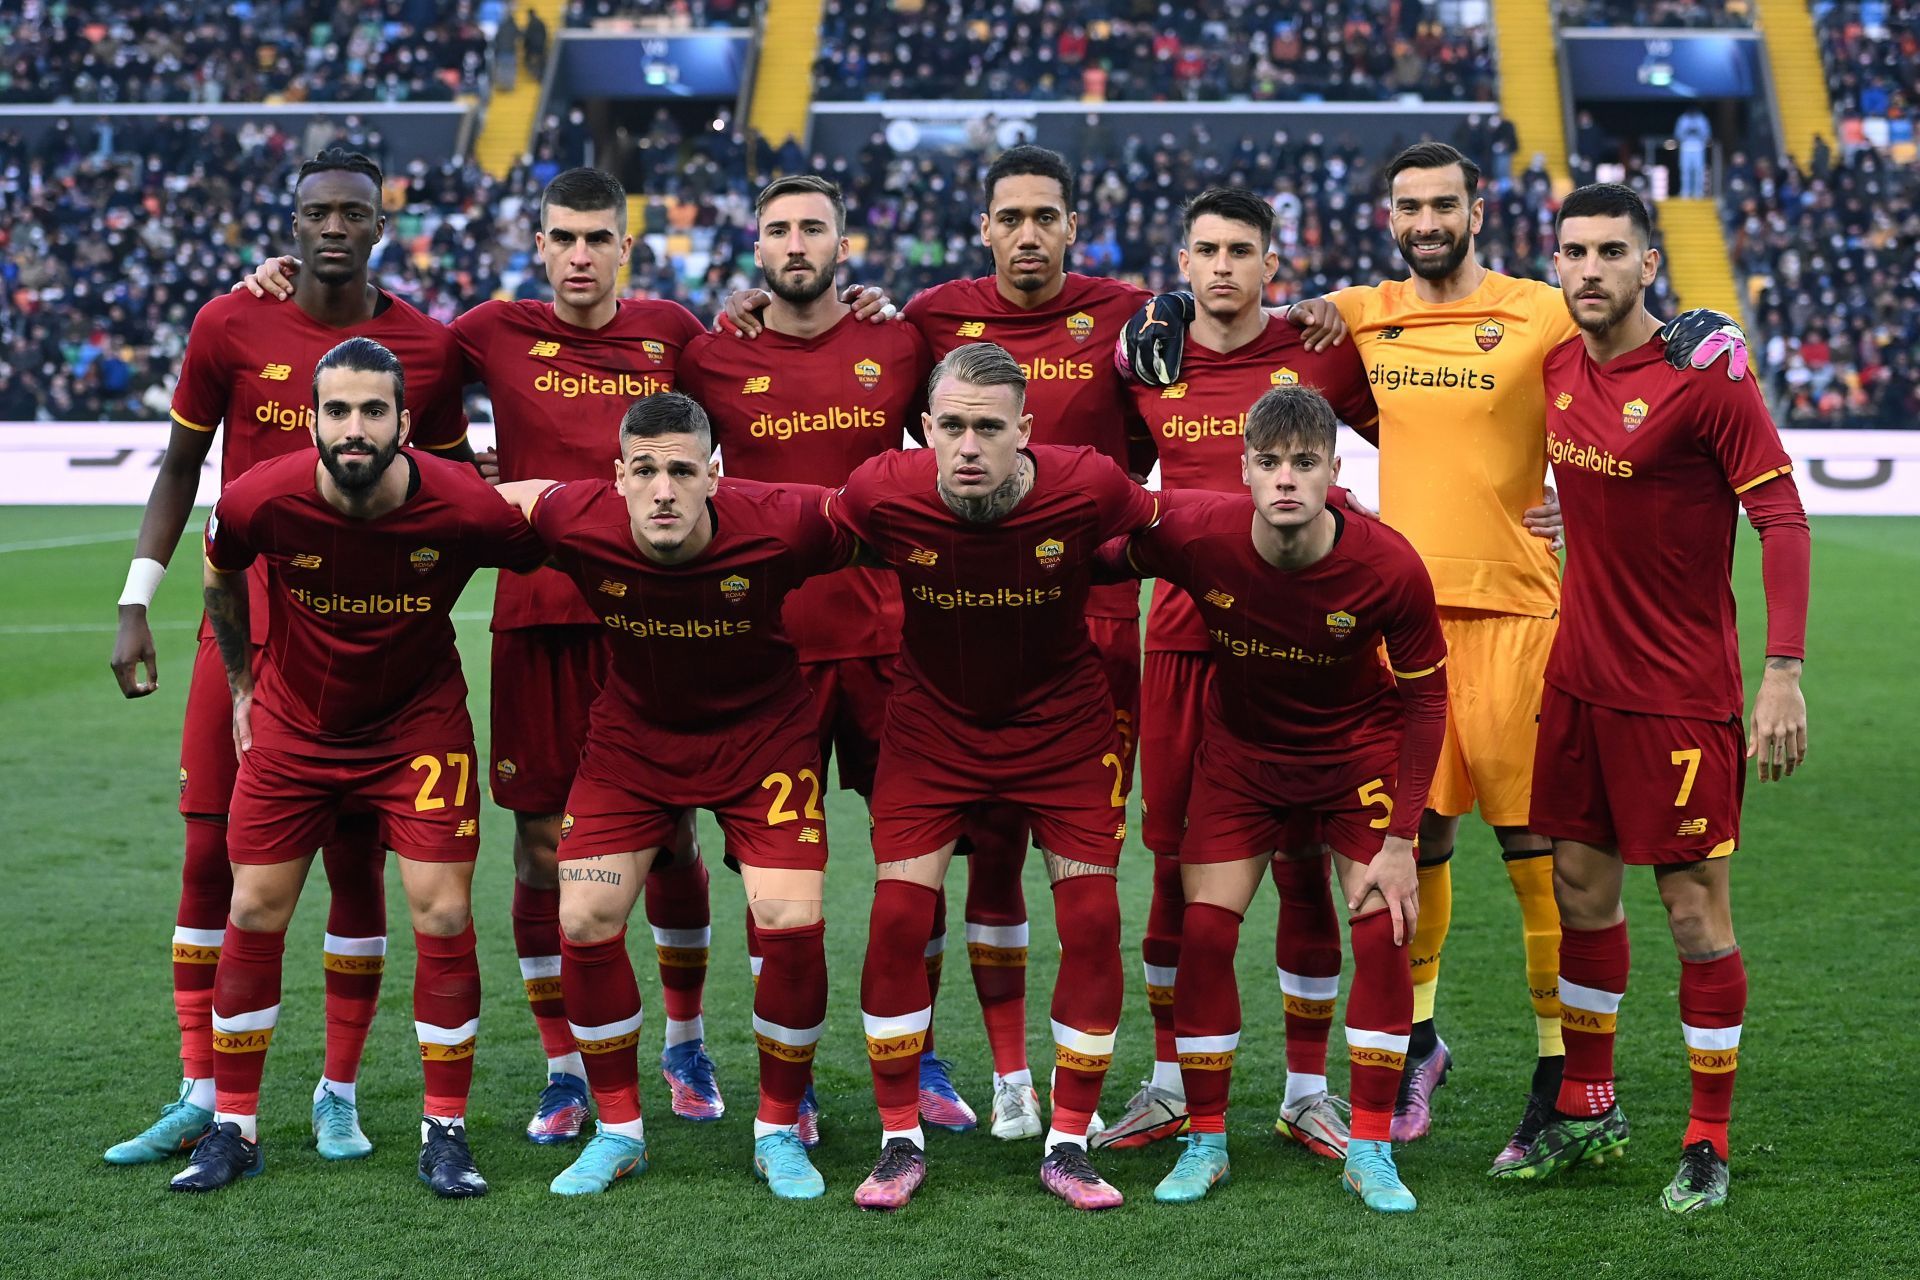 Roma play Lazio on Sunday in Serie A